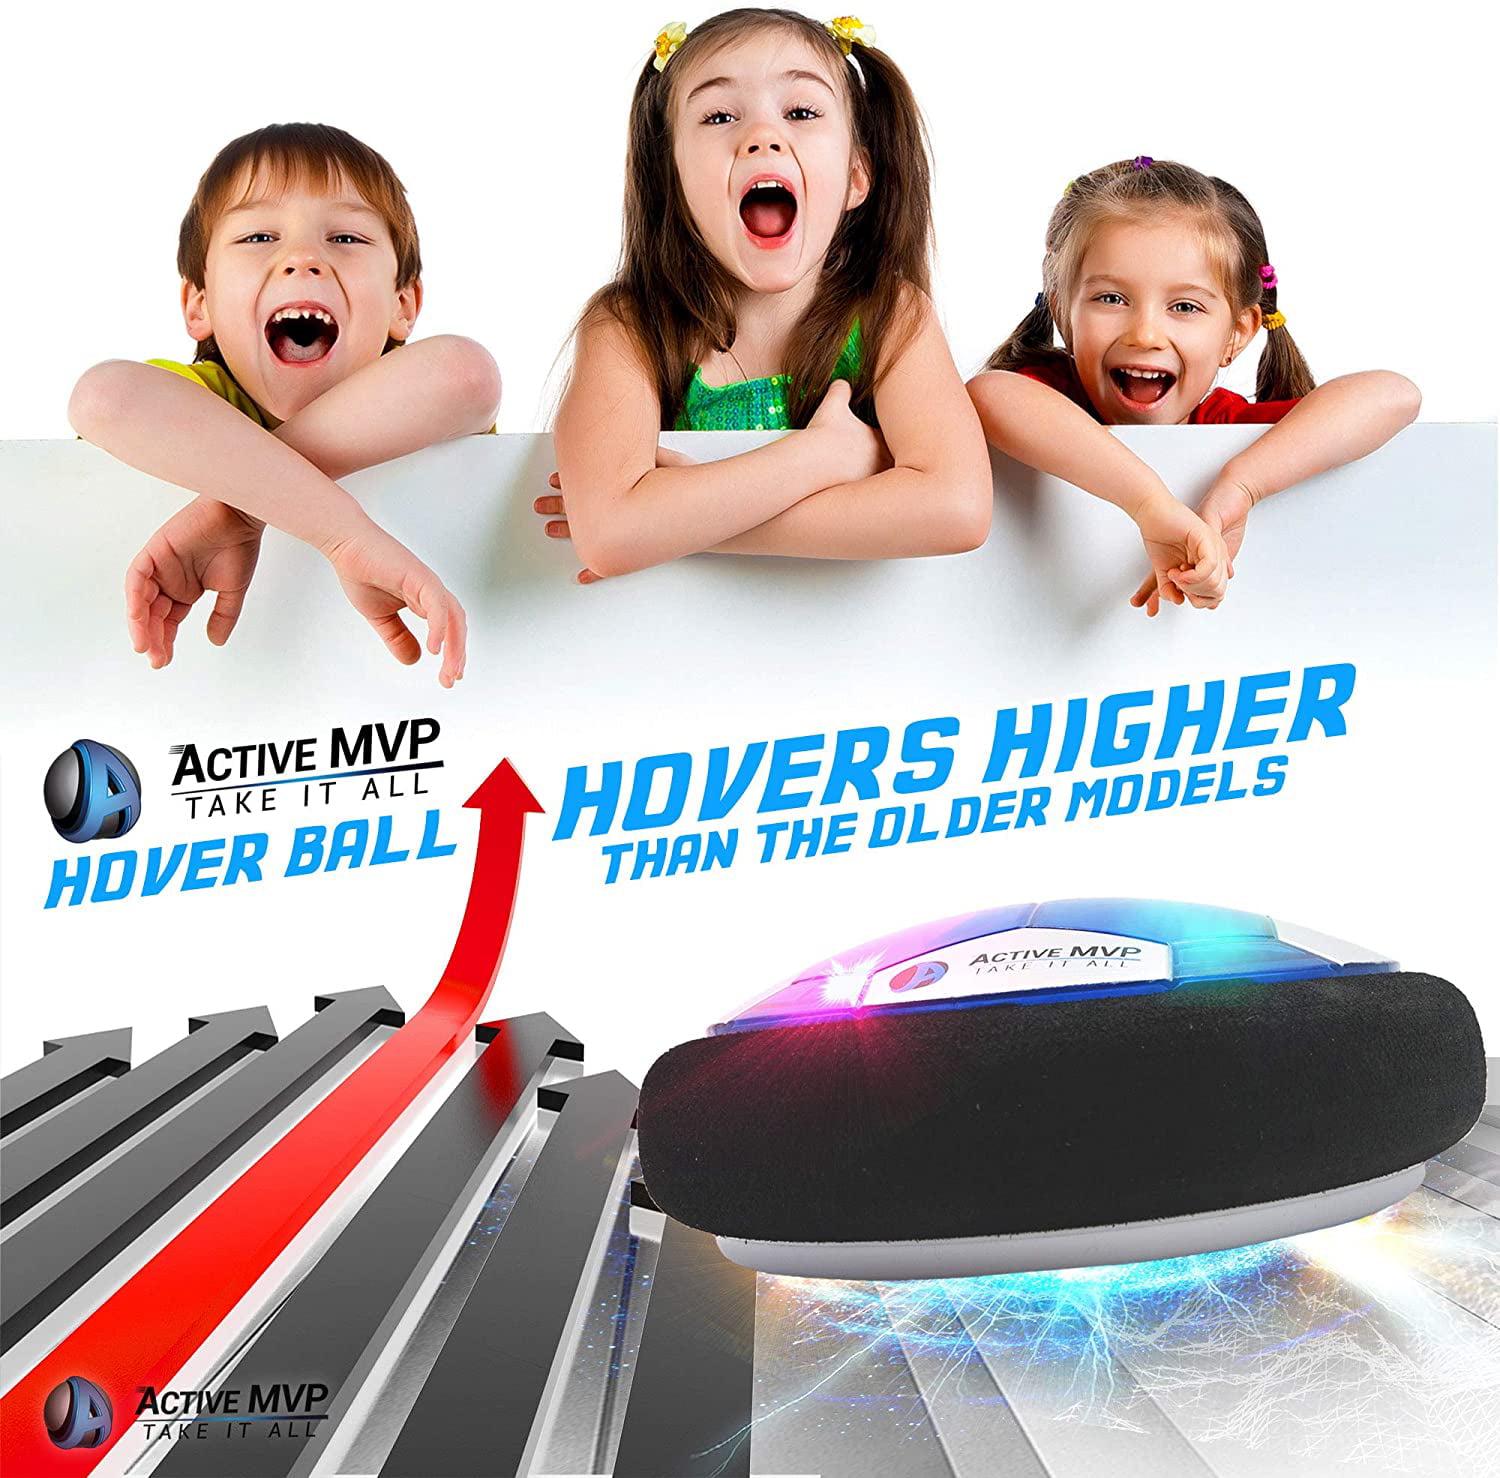 Hover Soccer Floating Football,WDDH Hover Soccer Ball Air Power Floating Football with LED Lights for Indoor/Outdoor Children Sports Games Gifts